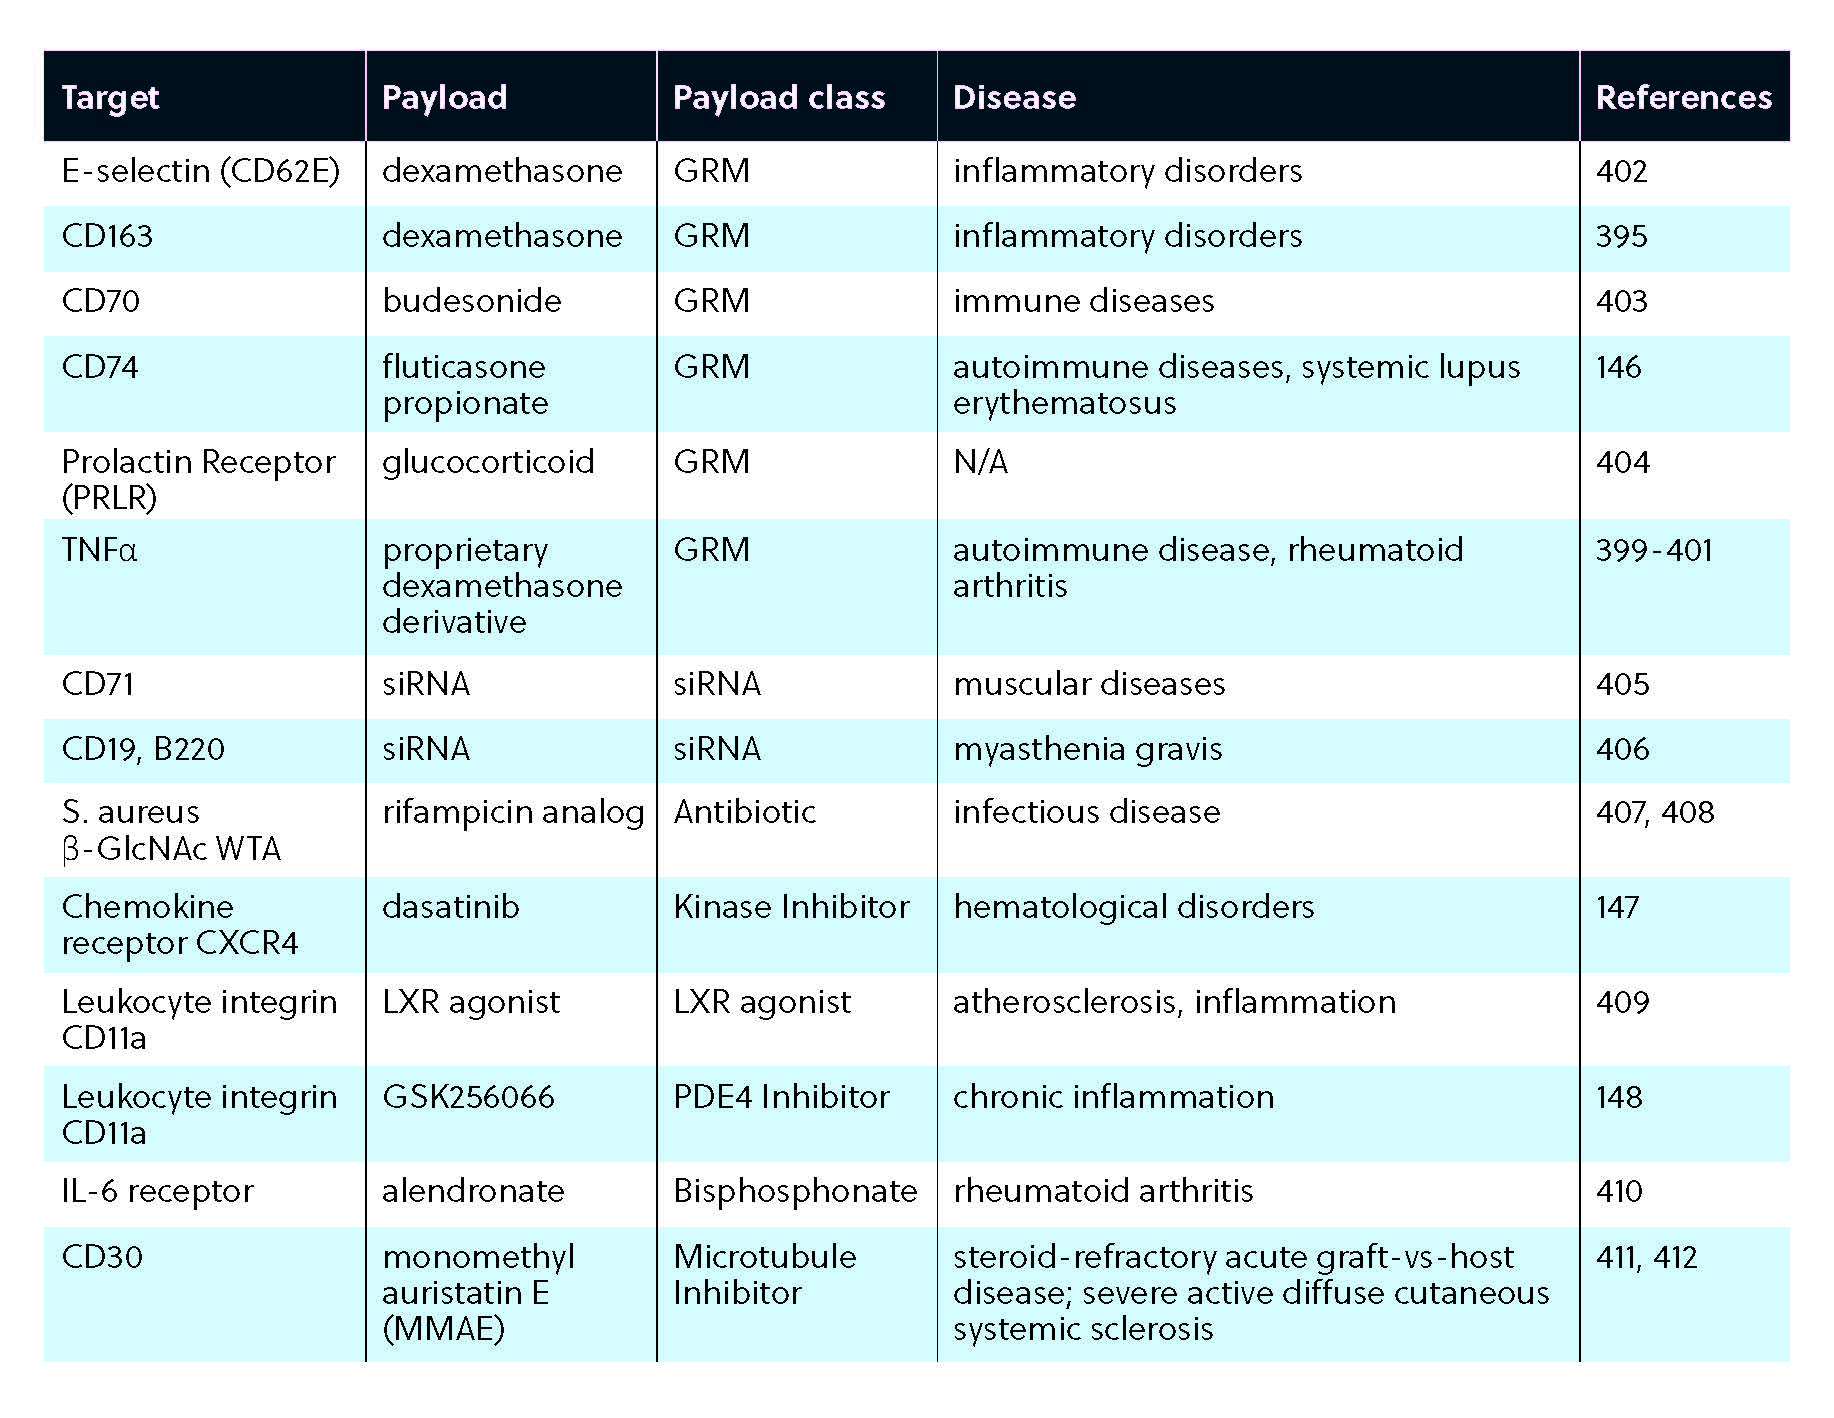 Examples of ADC strategy tested to modulate pathogenic cellular activity in non-oncology indications.